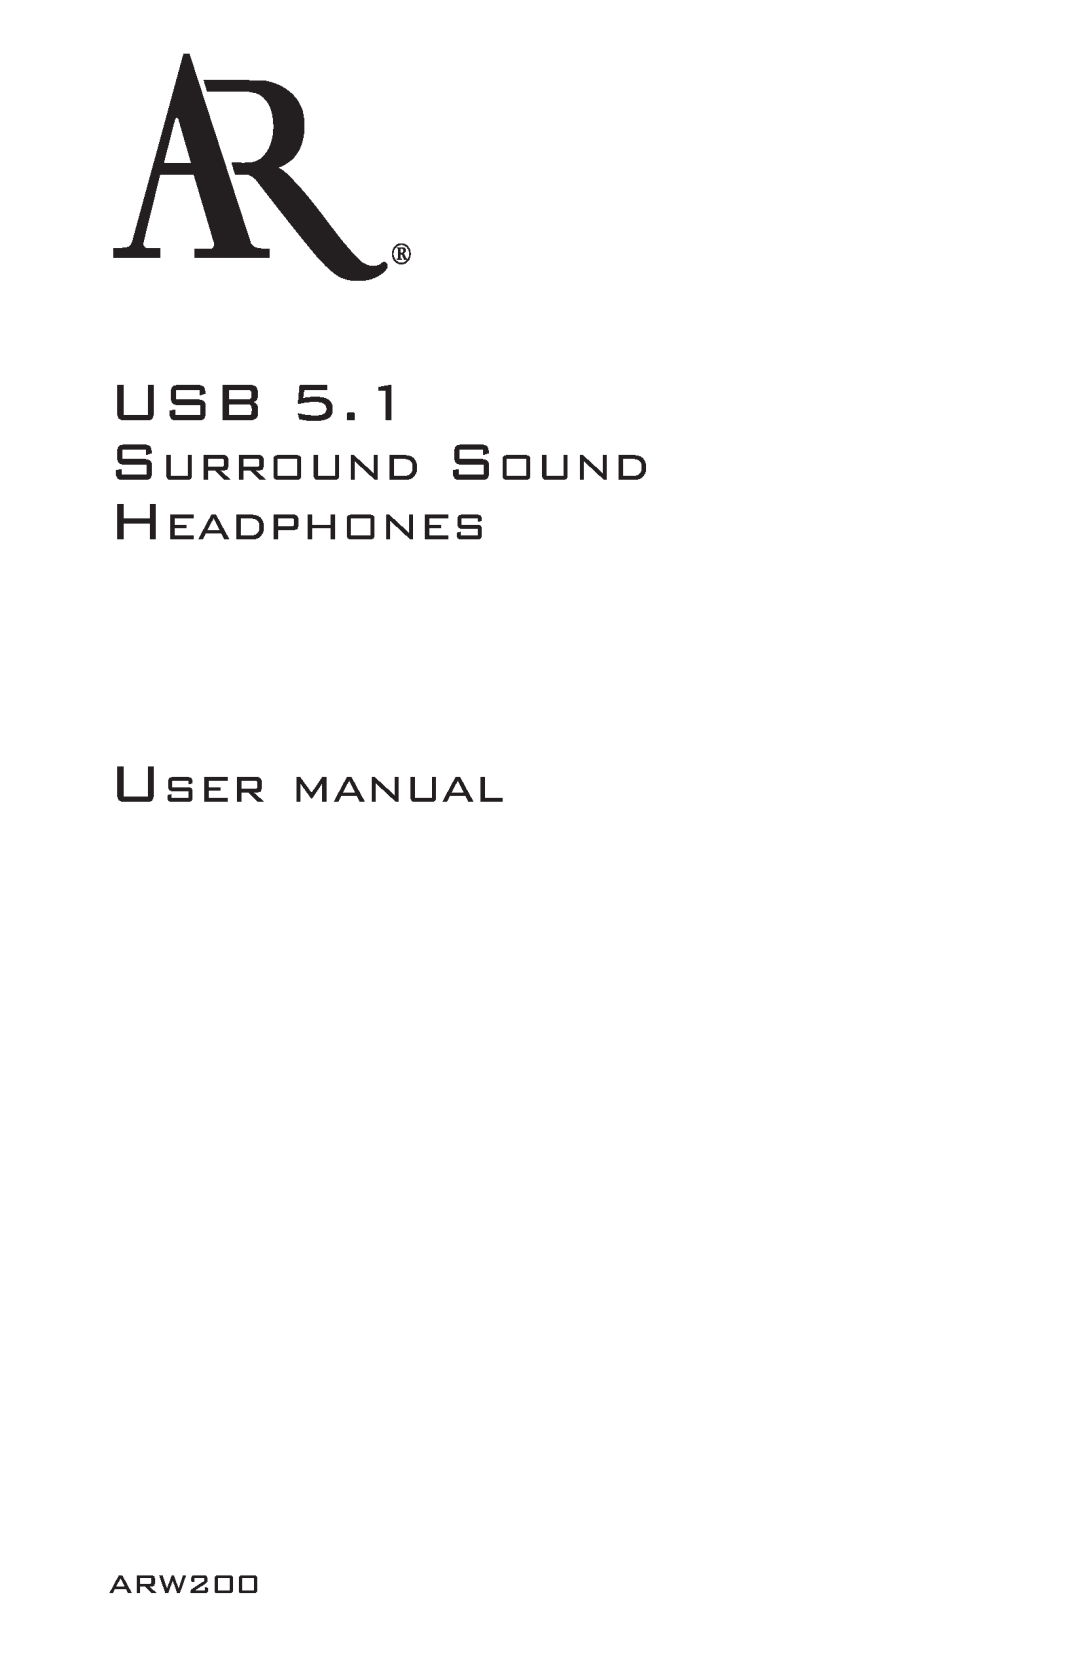 Acoustic Research ARW200 user manual 